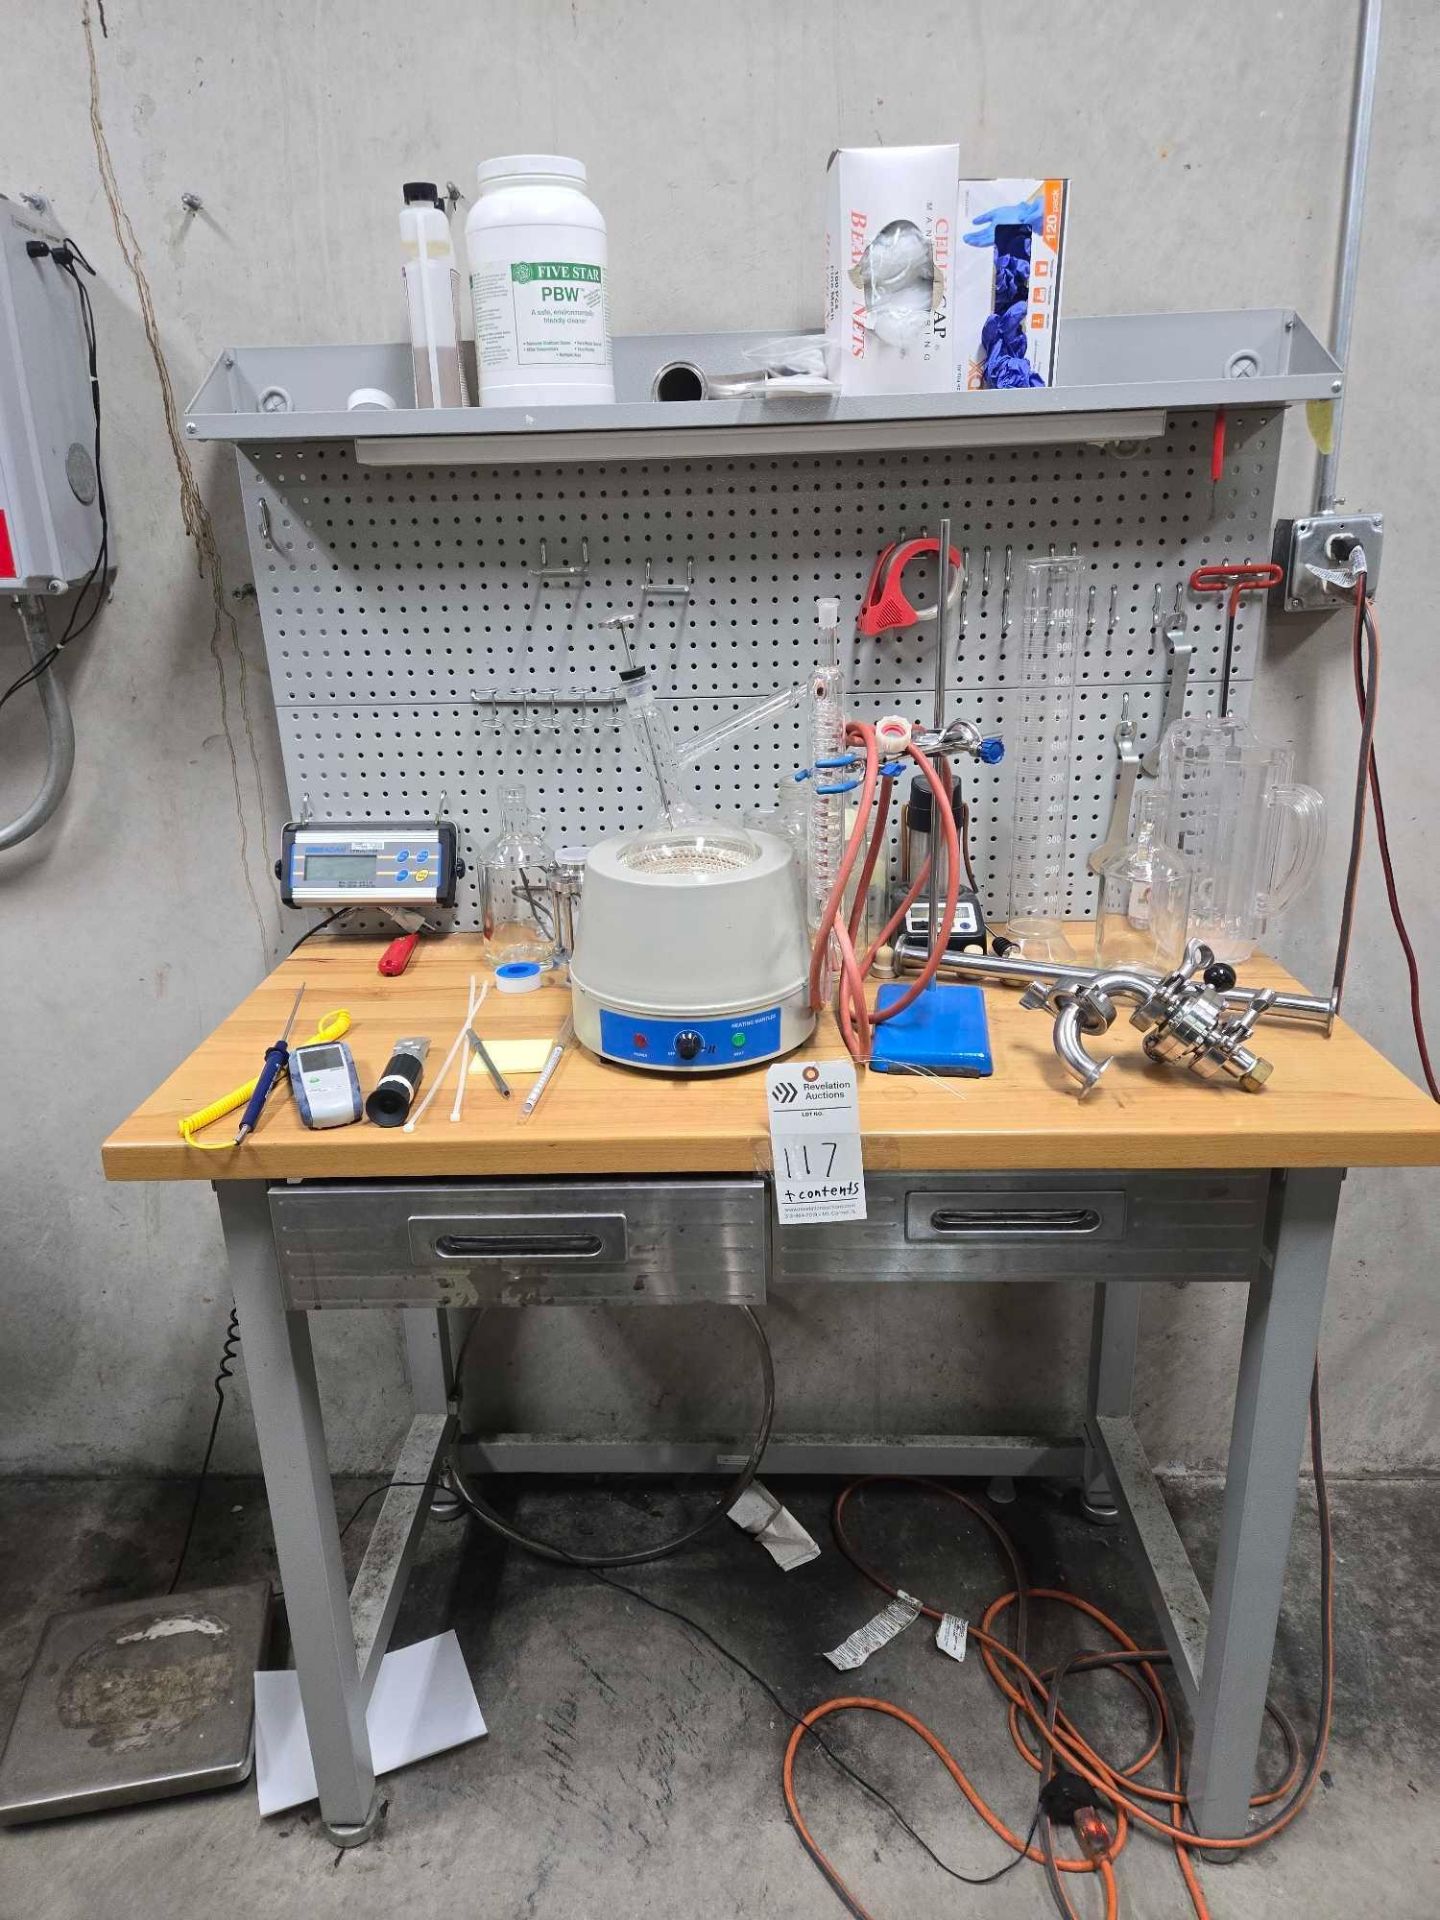 WORK CABINET AND ALL CONTENTS. TESTING AND MEASURING EQUIPMENT